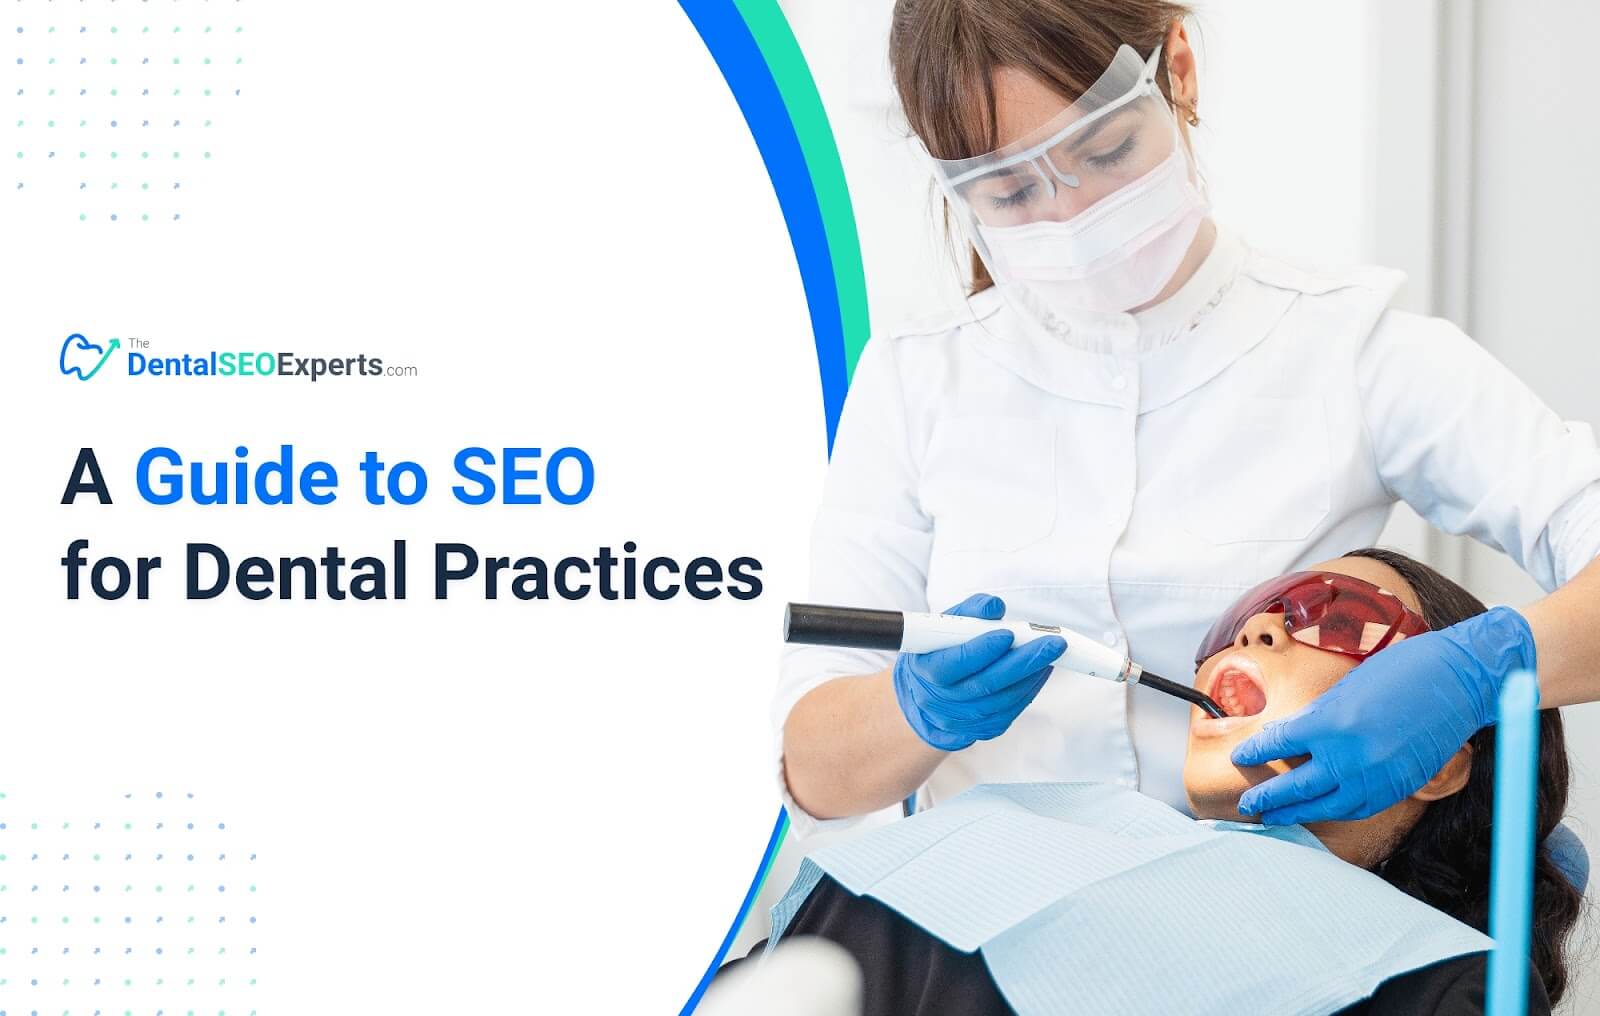 A Guide to SEO for Dental Practices